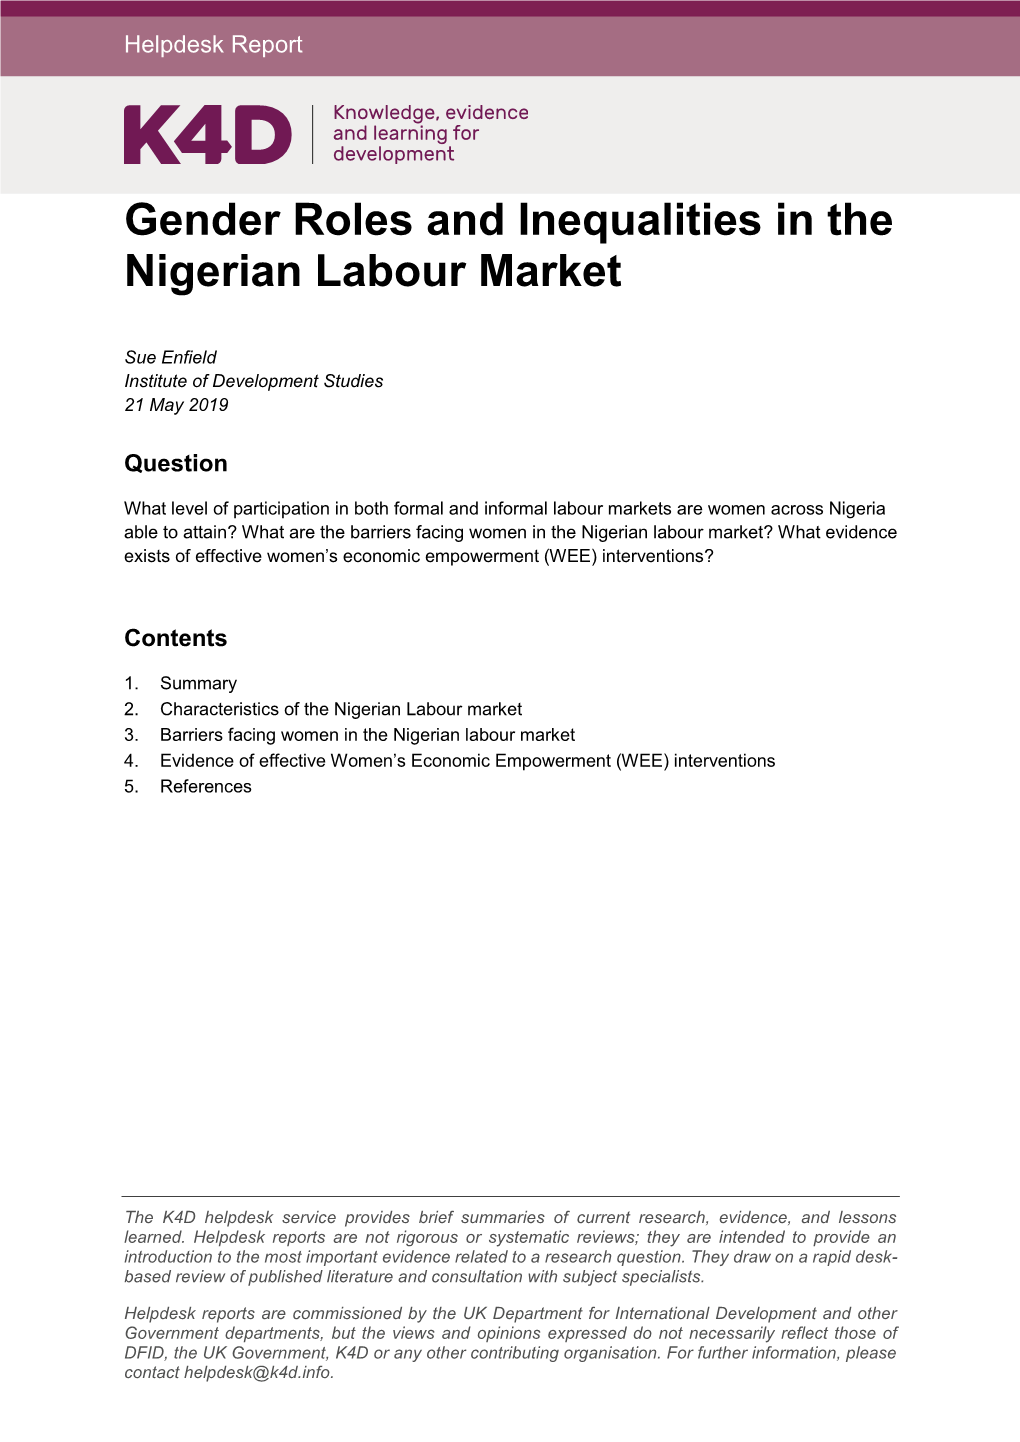 Gender Roles and Inequalities in the Nigerian Labour Market